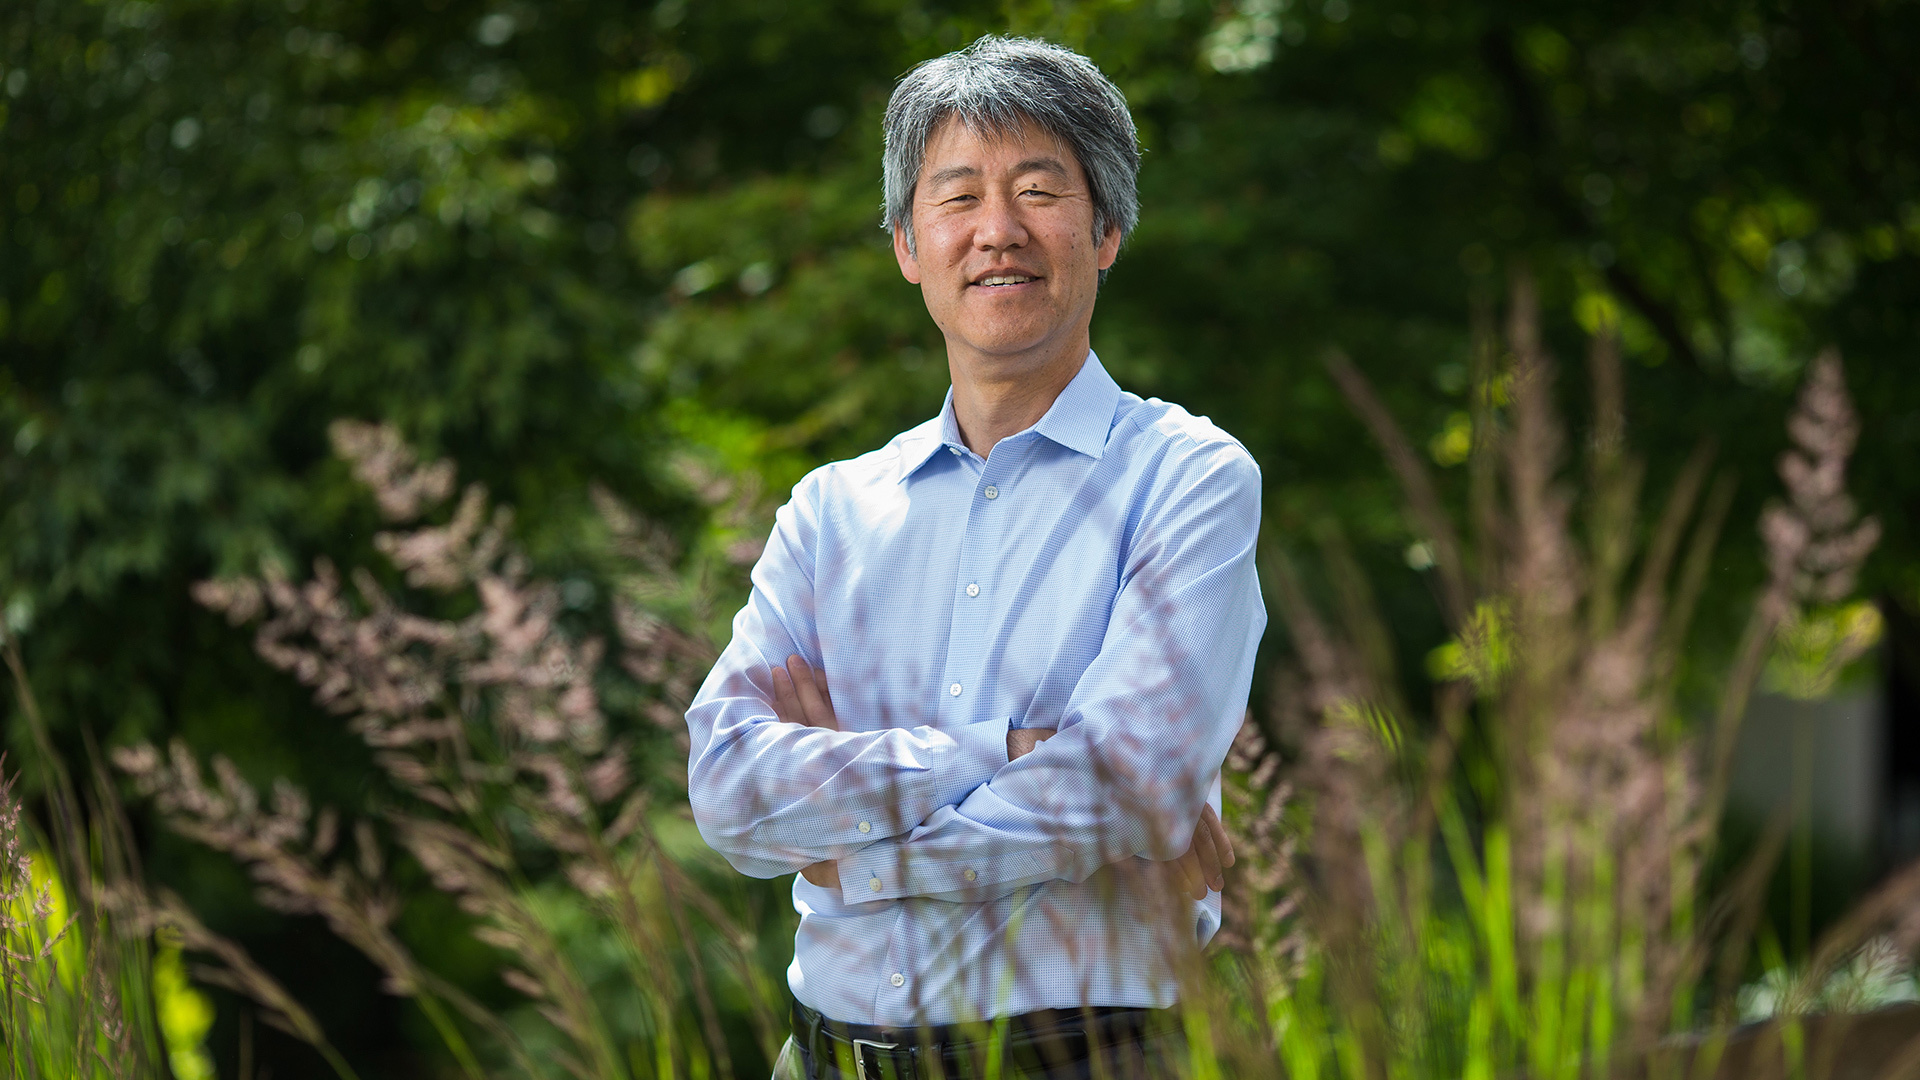 Peter Lee stands with arms crossed behind some plants